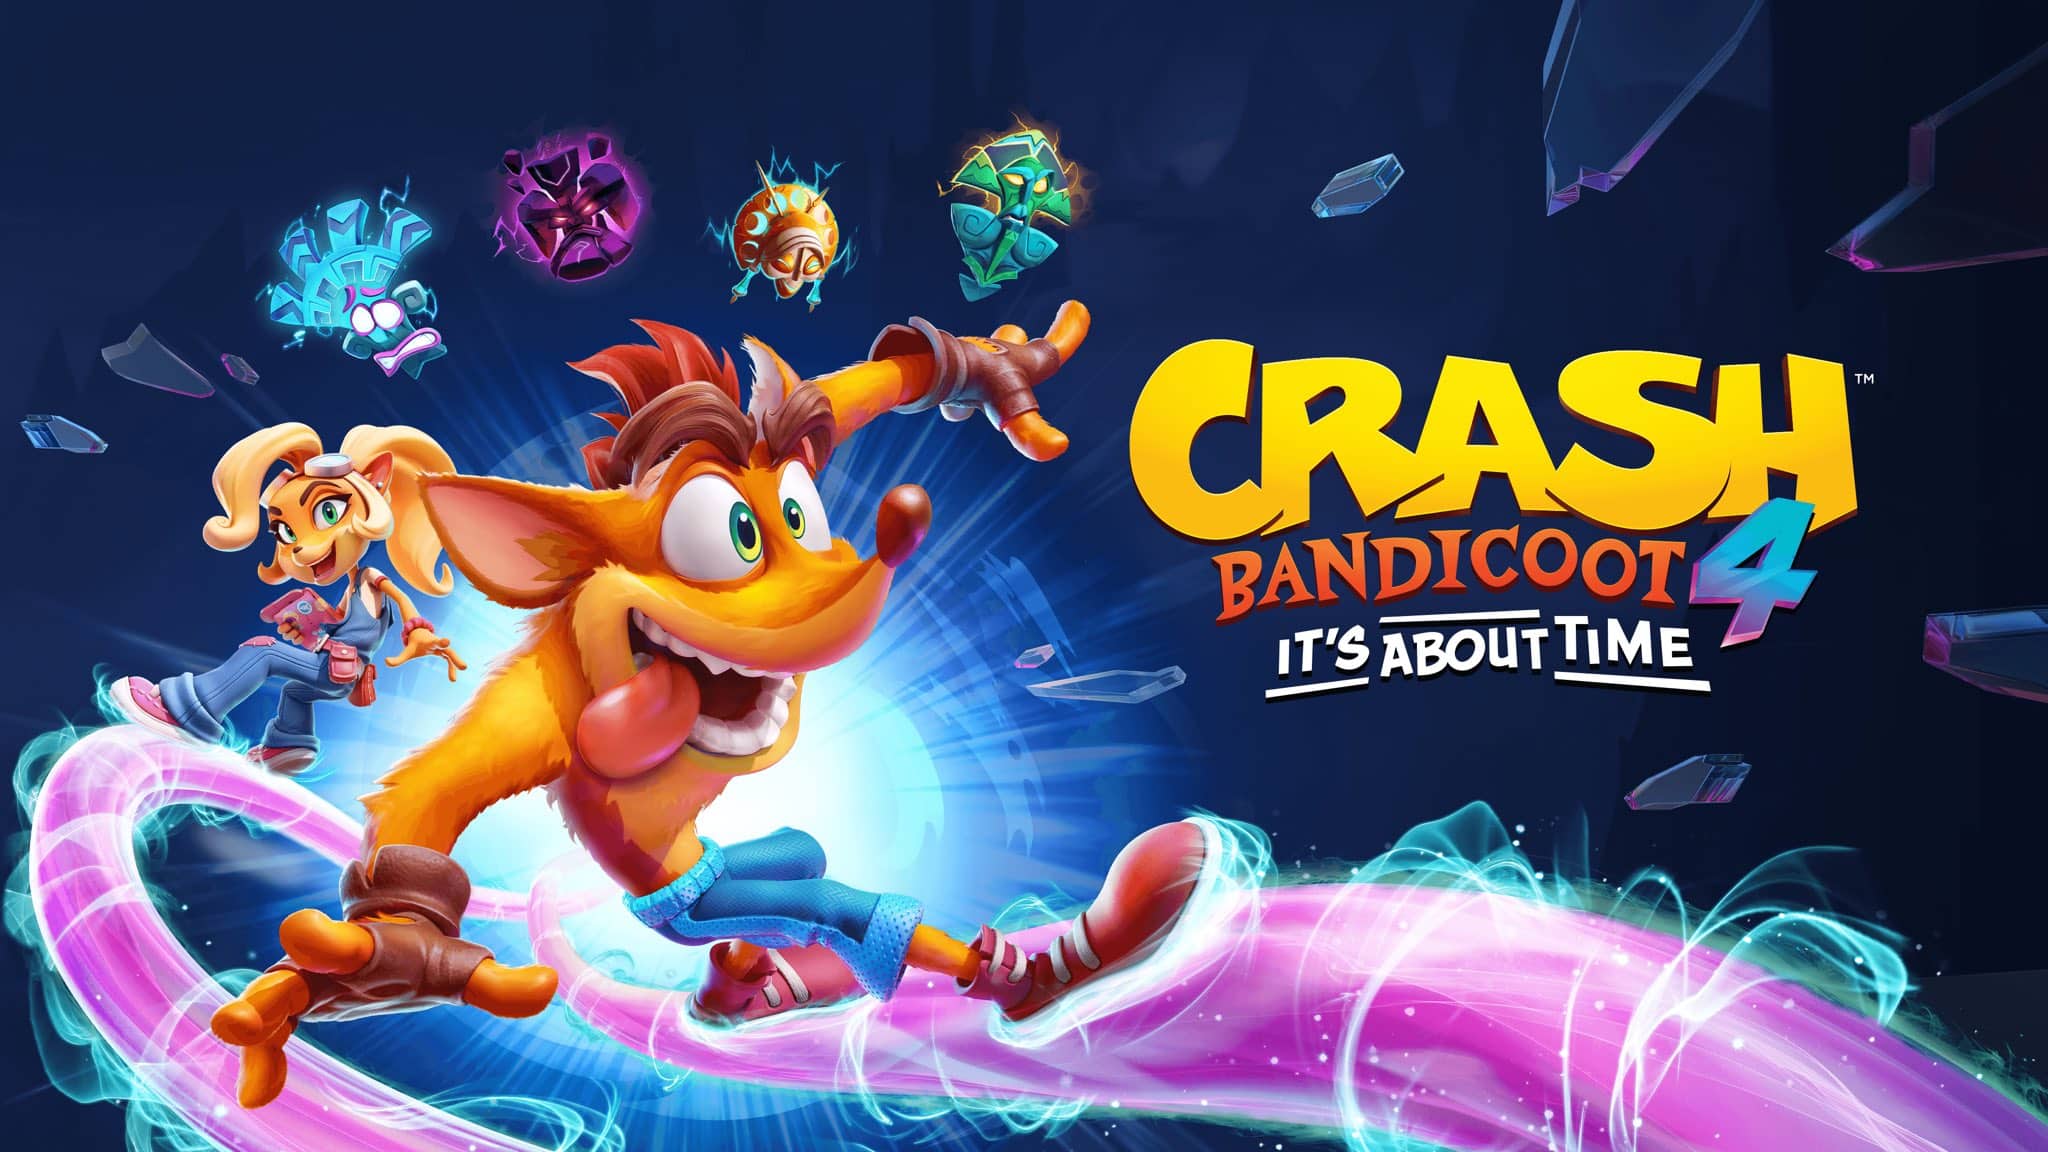 Crash Bandicoot 4: It’s About Time to Feature Offline Multiplayer